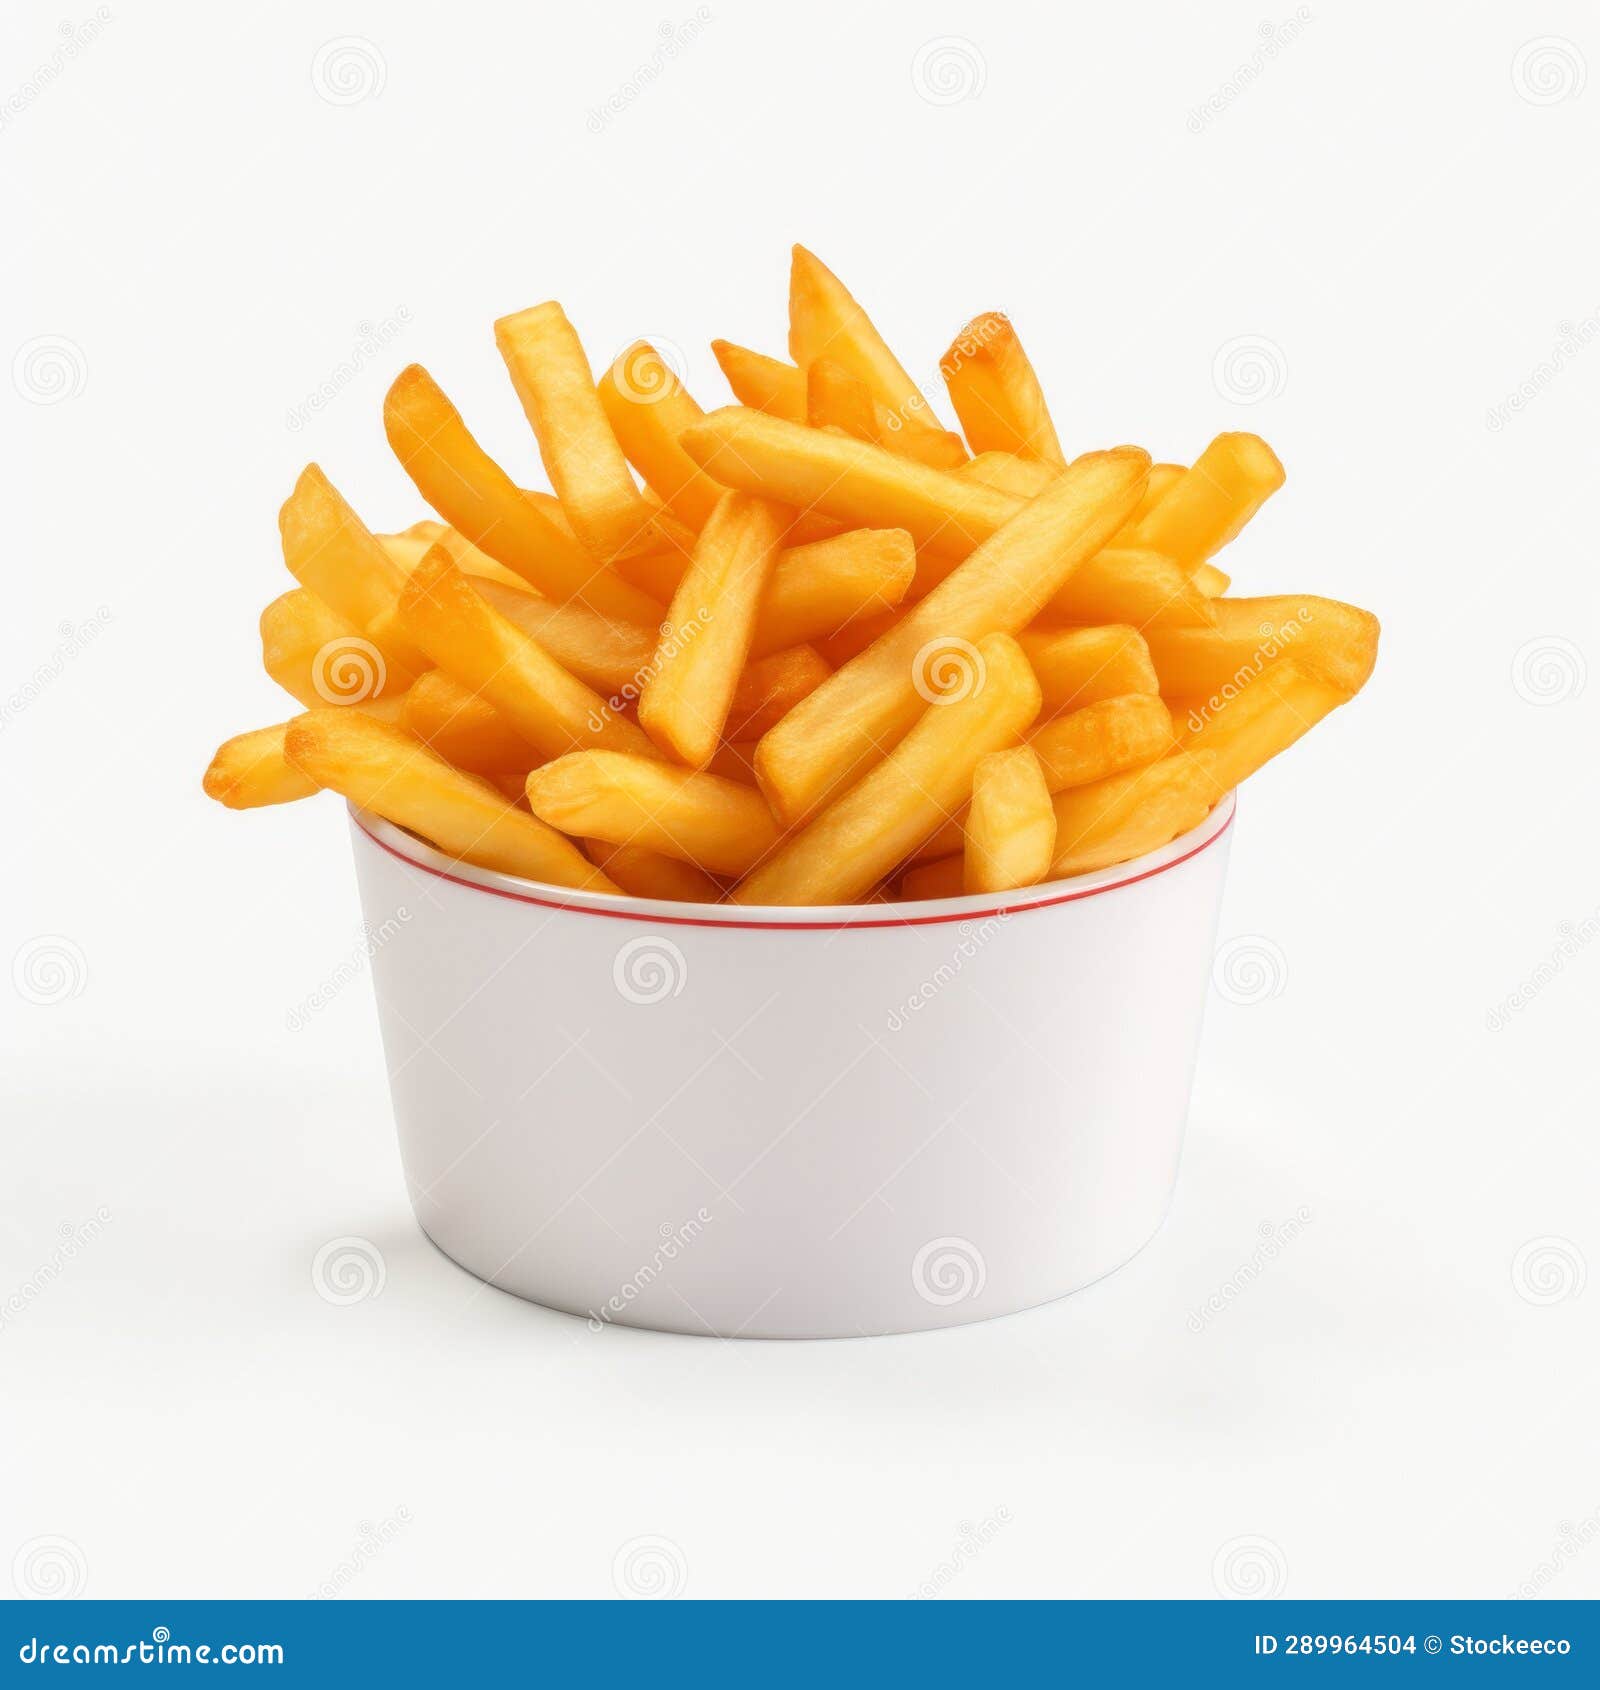 ultra realistic 4k fries on white background - high definition